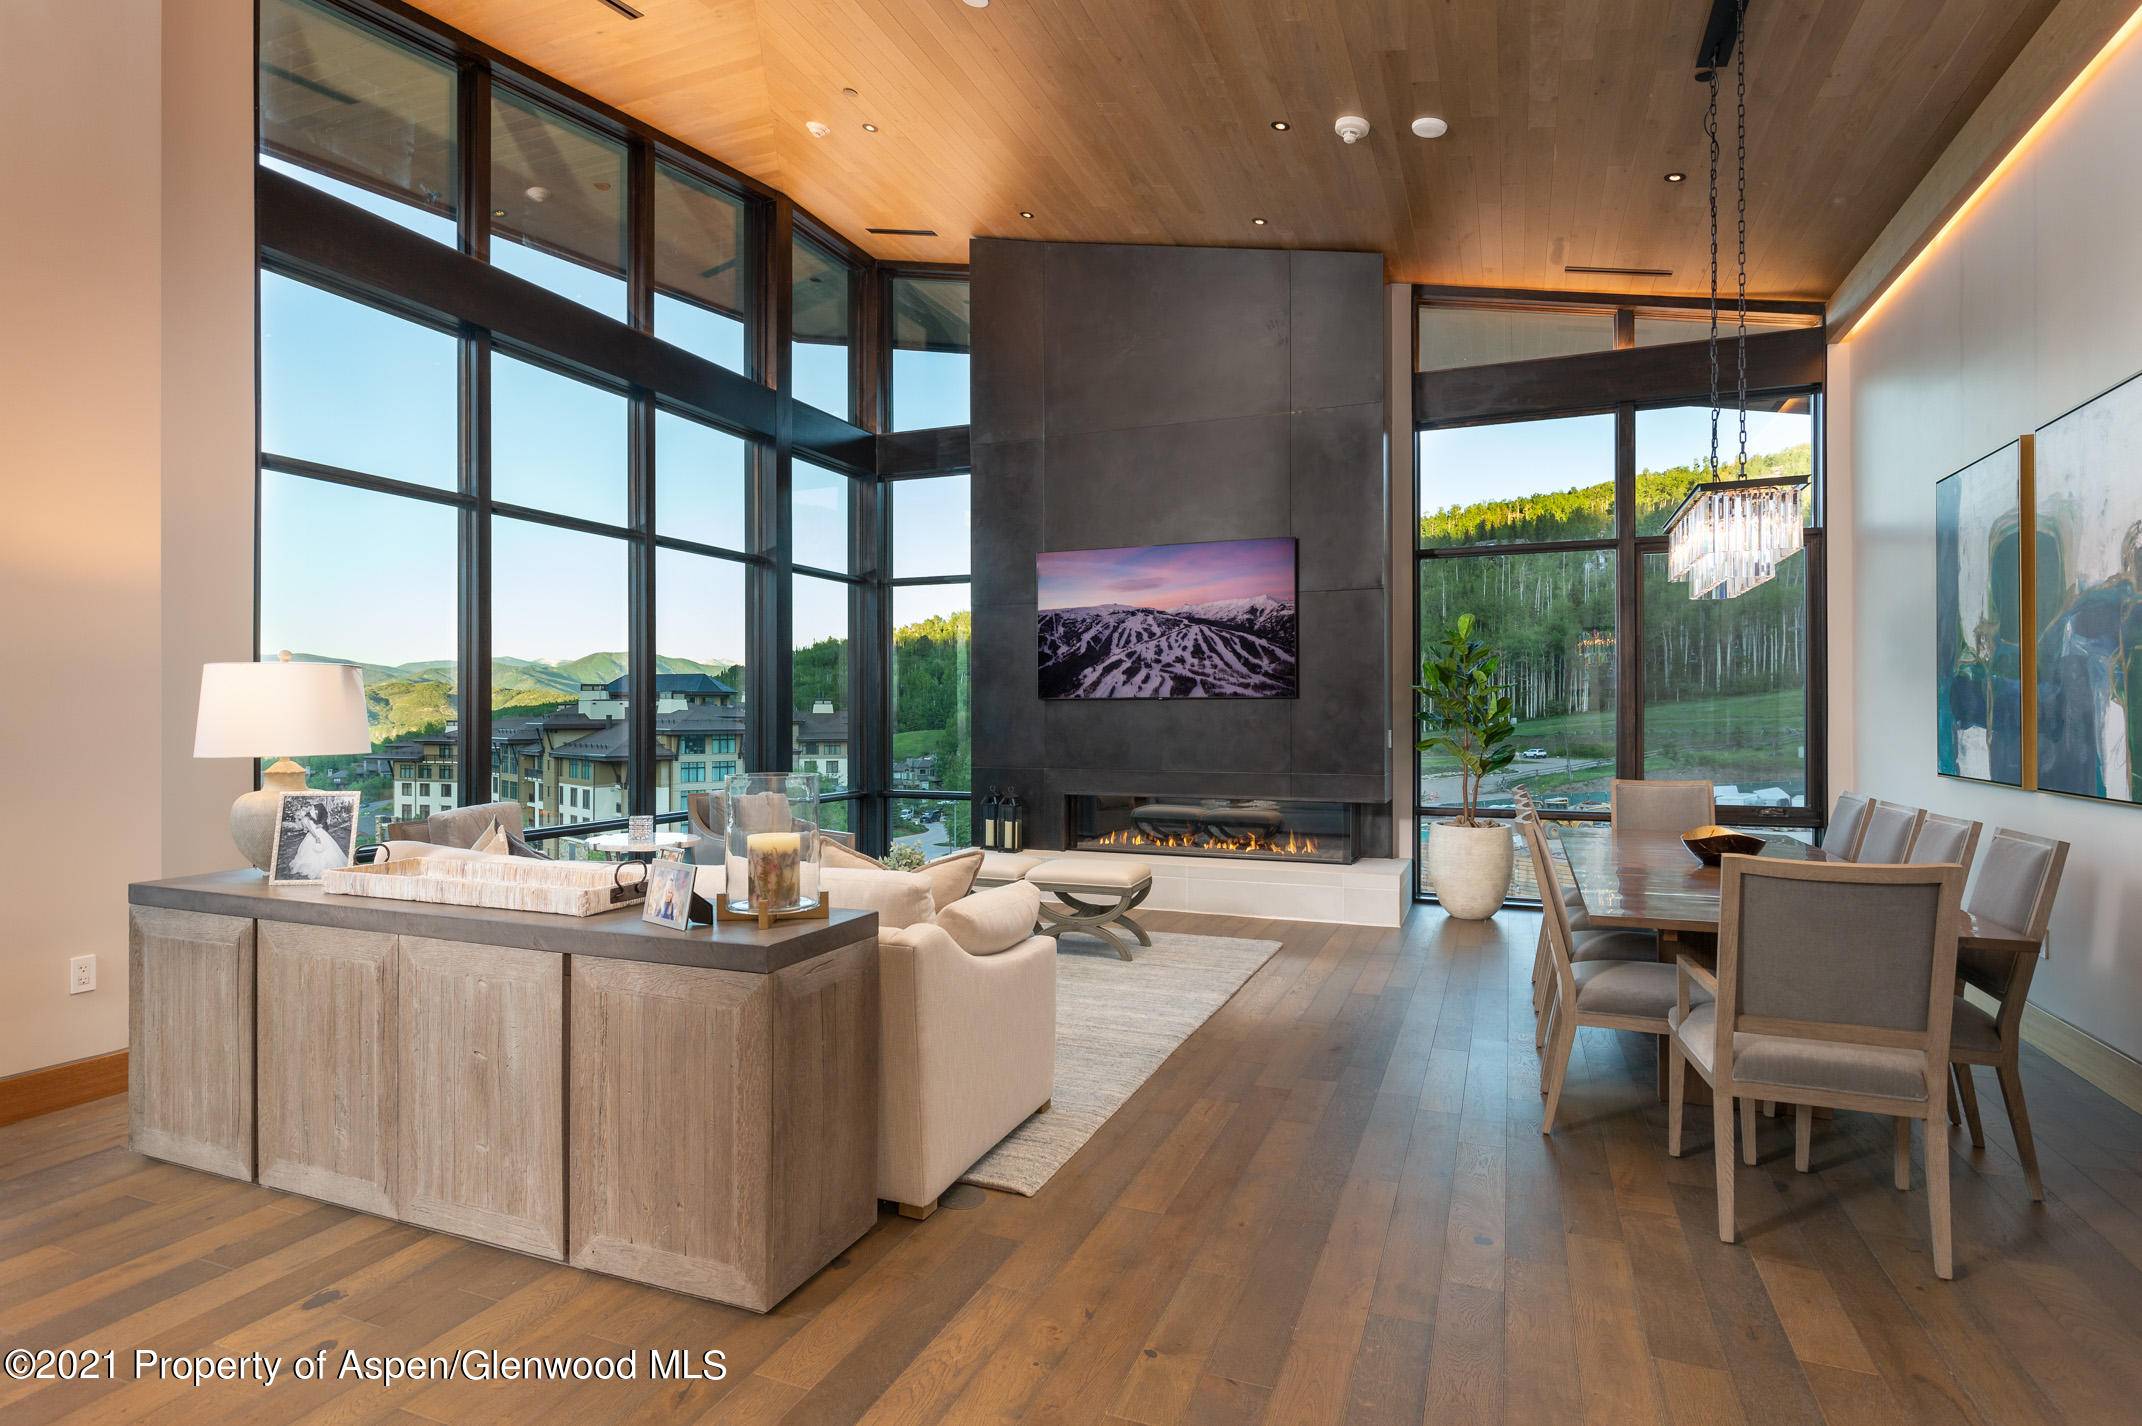 607 East features luxurious finishes and fixtures, sweeping mountain views, sunset dining deck with gas grill hookup, blackened steel Ortal fireplace, Gaggenau kitchen appliances, five fixture master bath and large ...